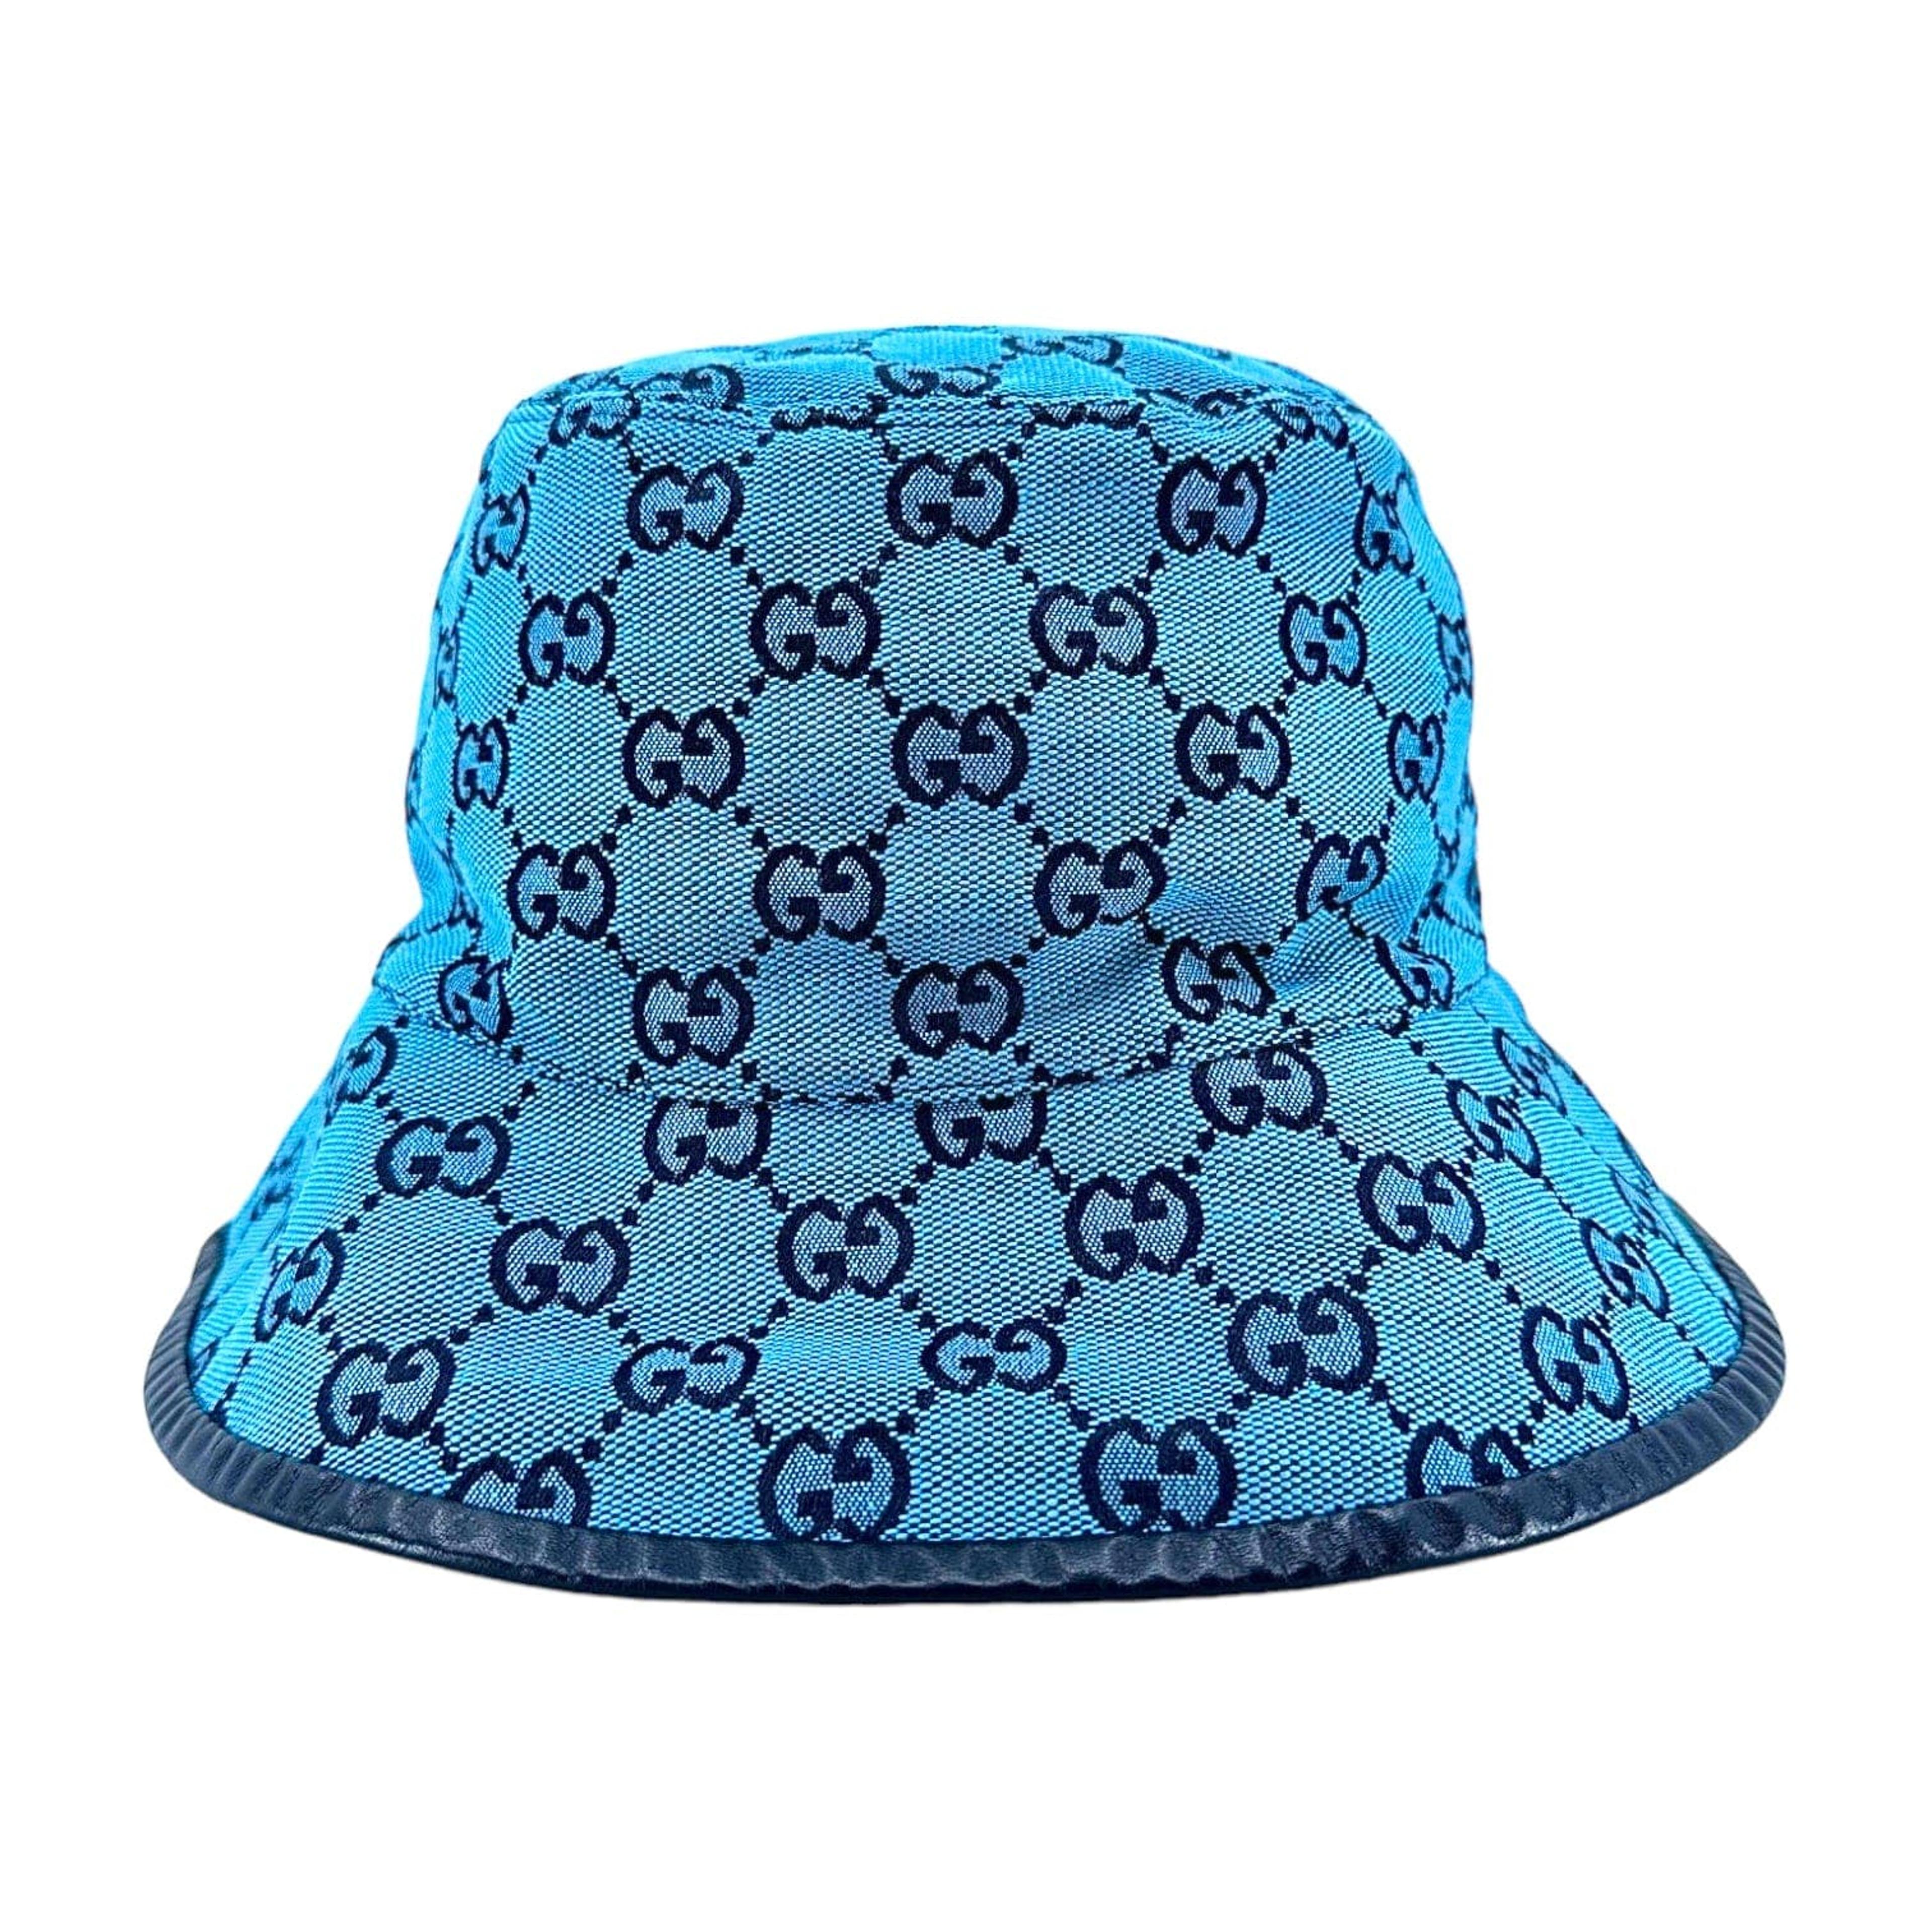 Alternate View 2 of Gucci GG Multicolor Canvas Bucket Hat Blue Black Pre-Owned